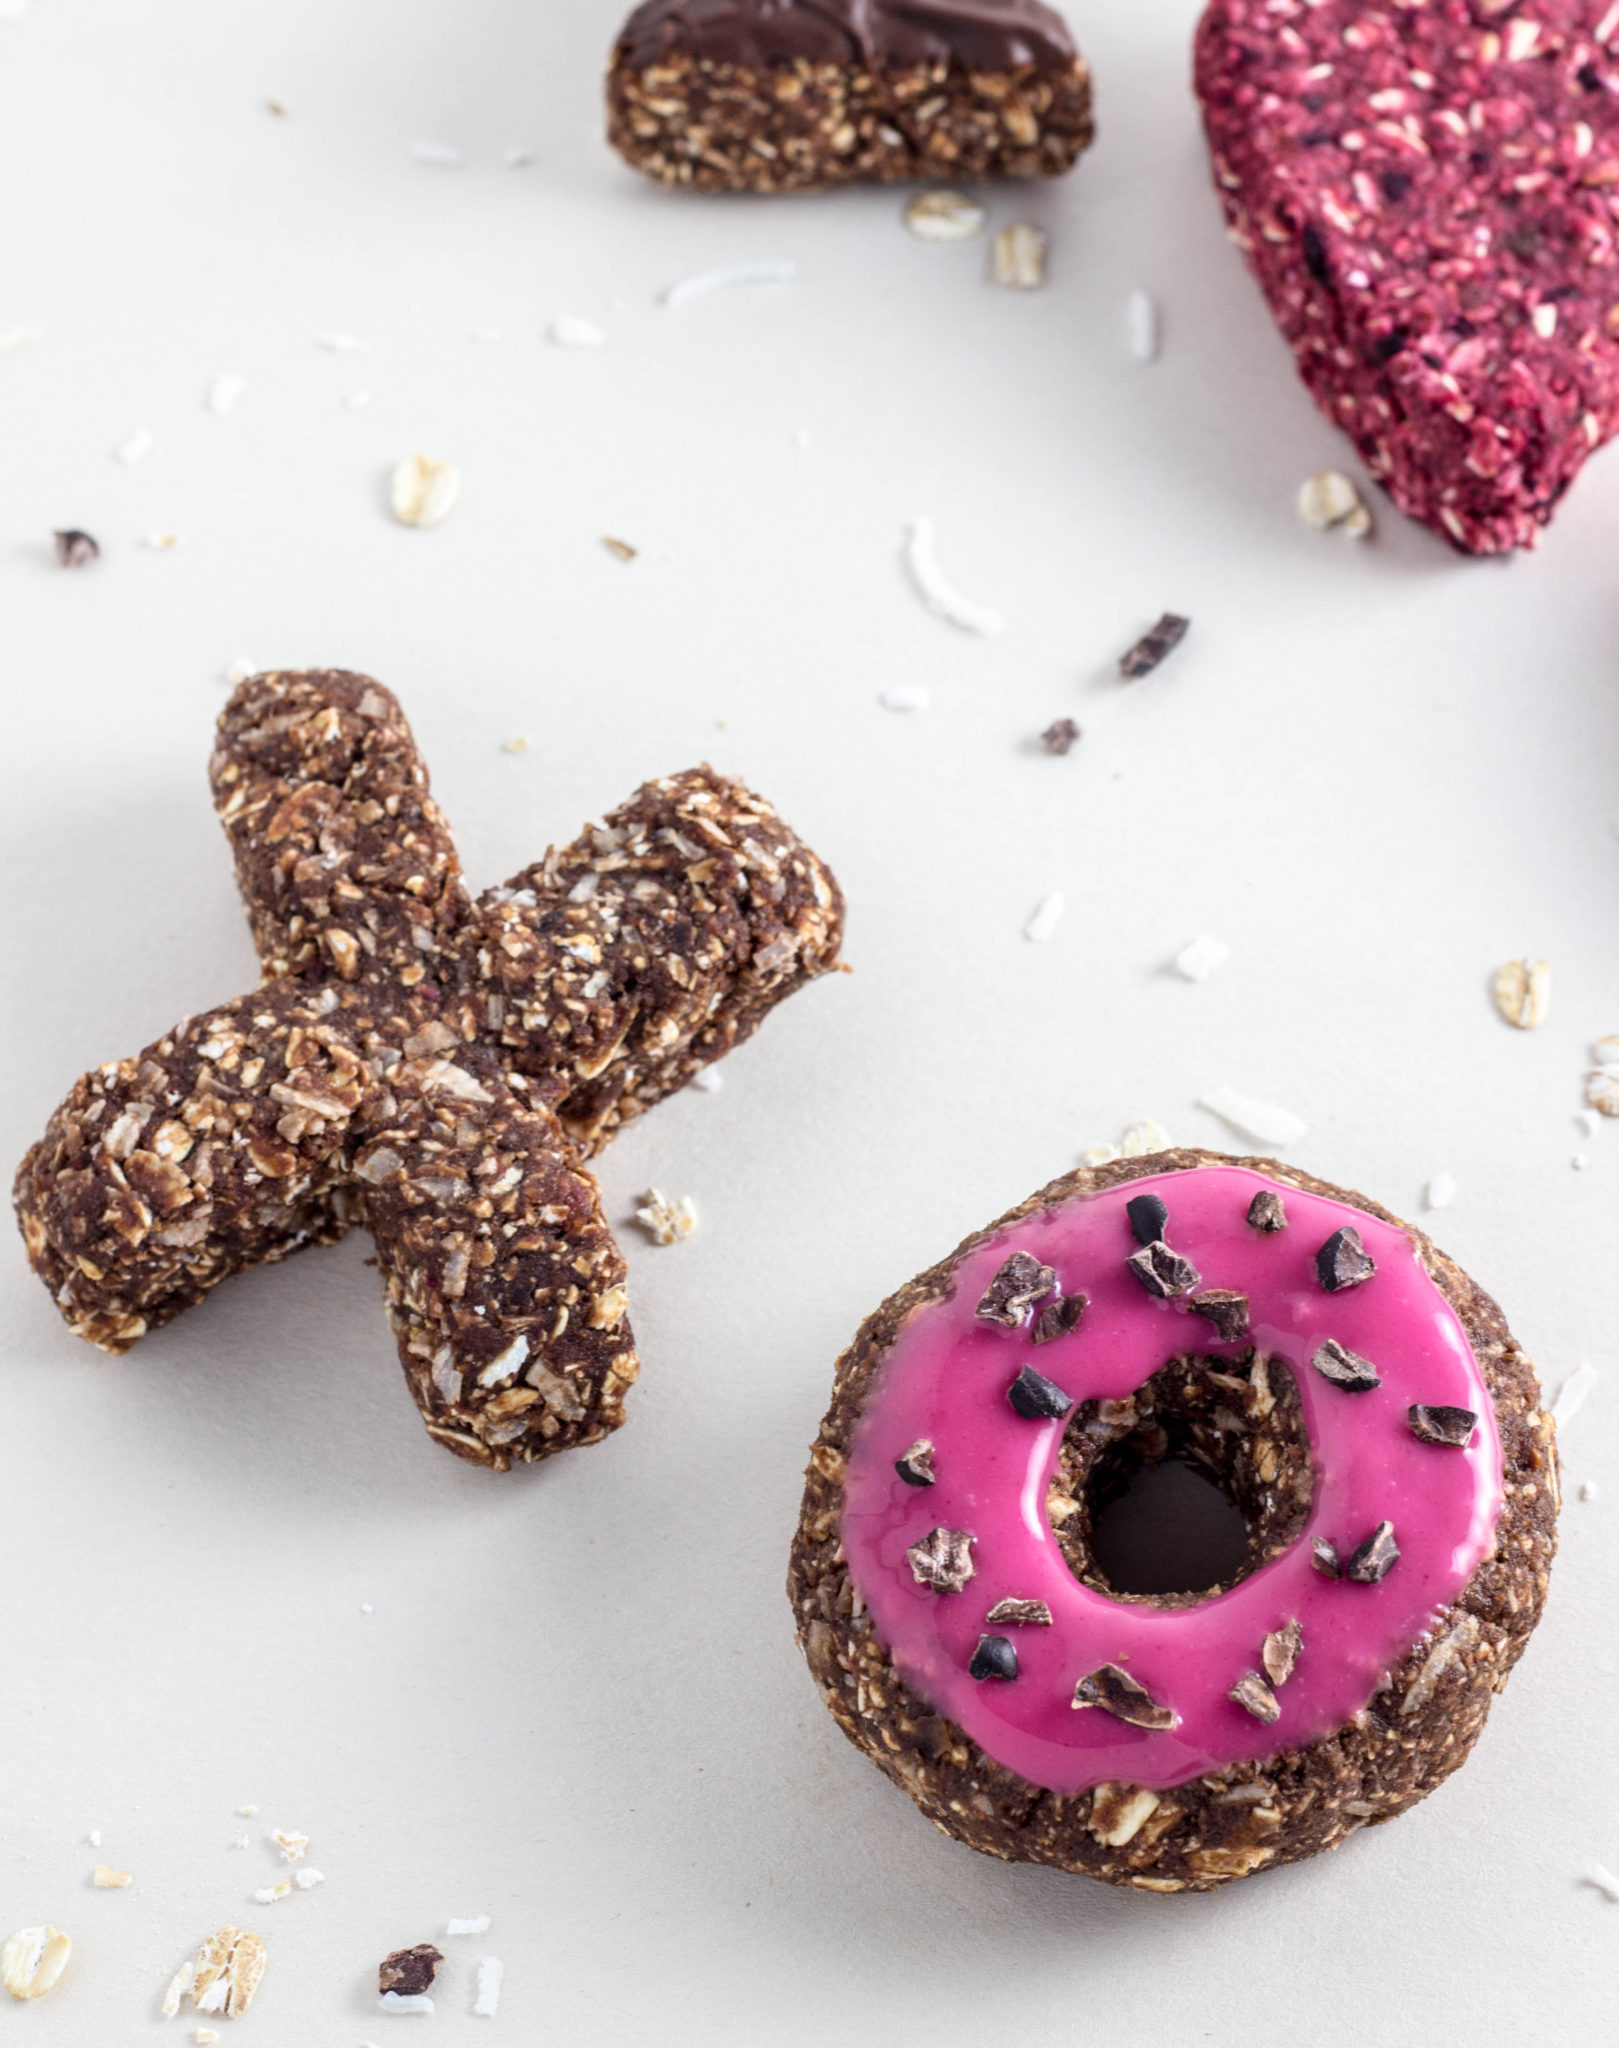 Vegan Raw Doughnuts-Made with grated beet for a festive pink, loads of nutrition, and of course chocolate for a decadent treat. So simple to make. 